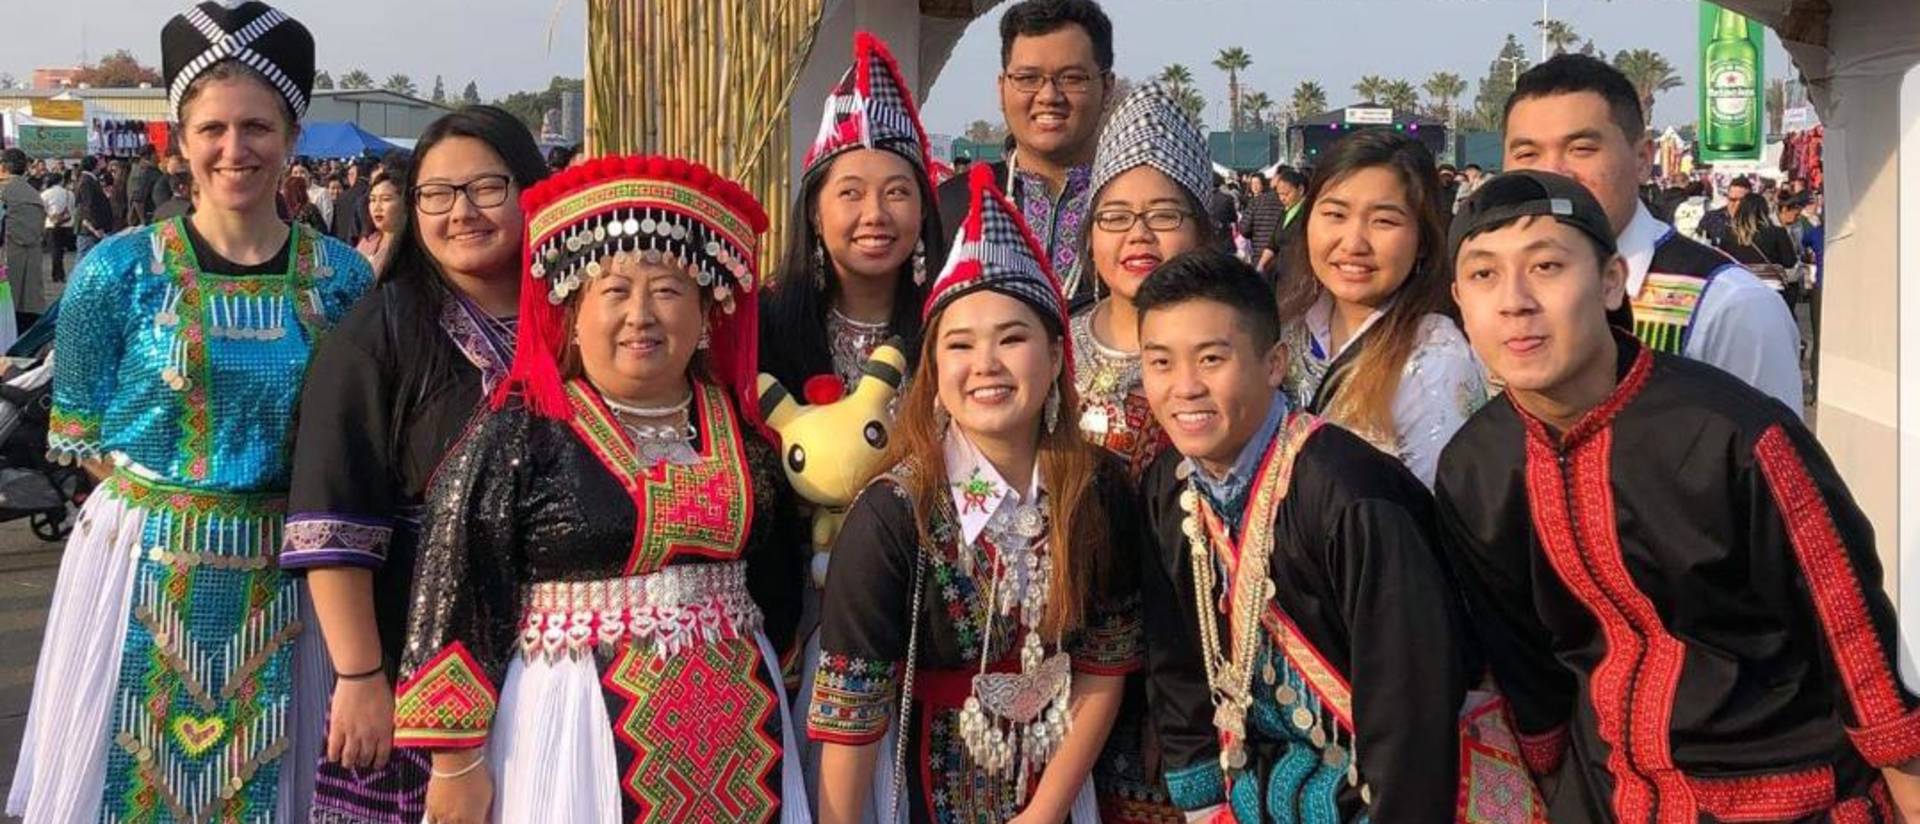 Blugold faculty and students were immersed in Hmong culture and language during a recent immersion in California, which included participating in the Hmong New Year celebration in Fresno.